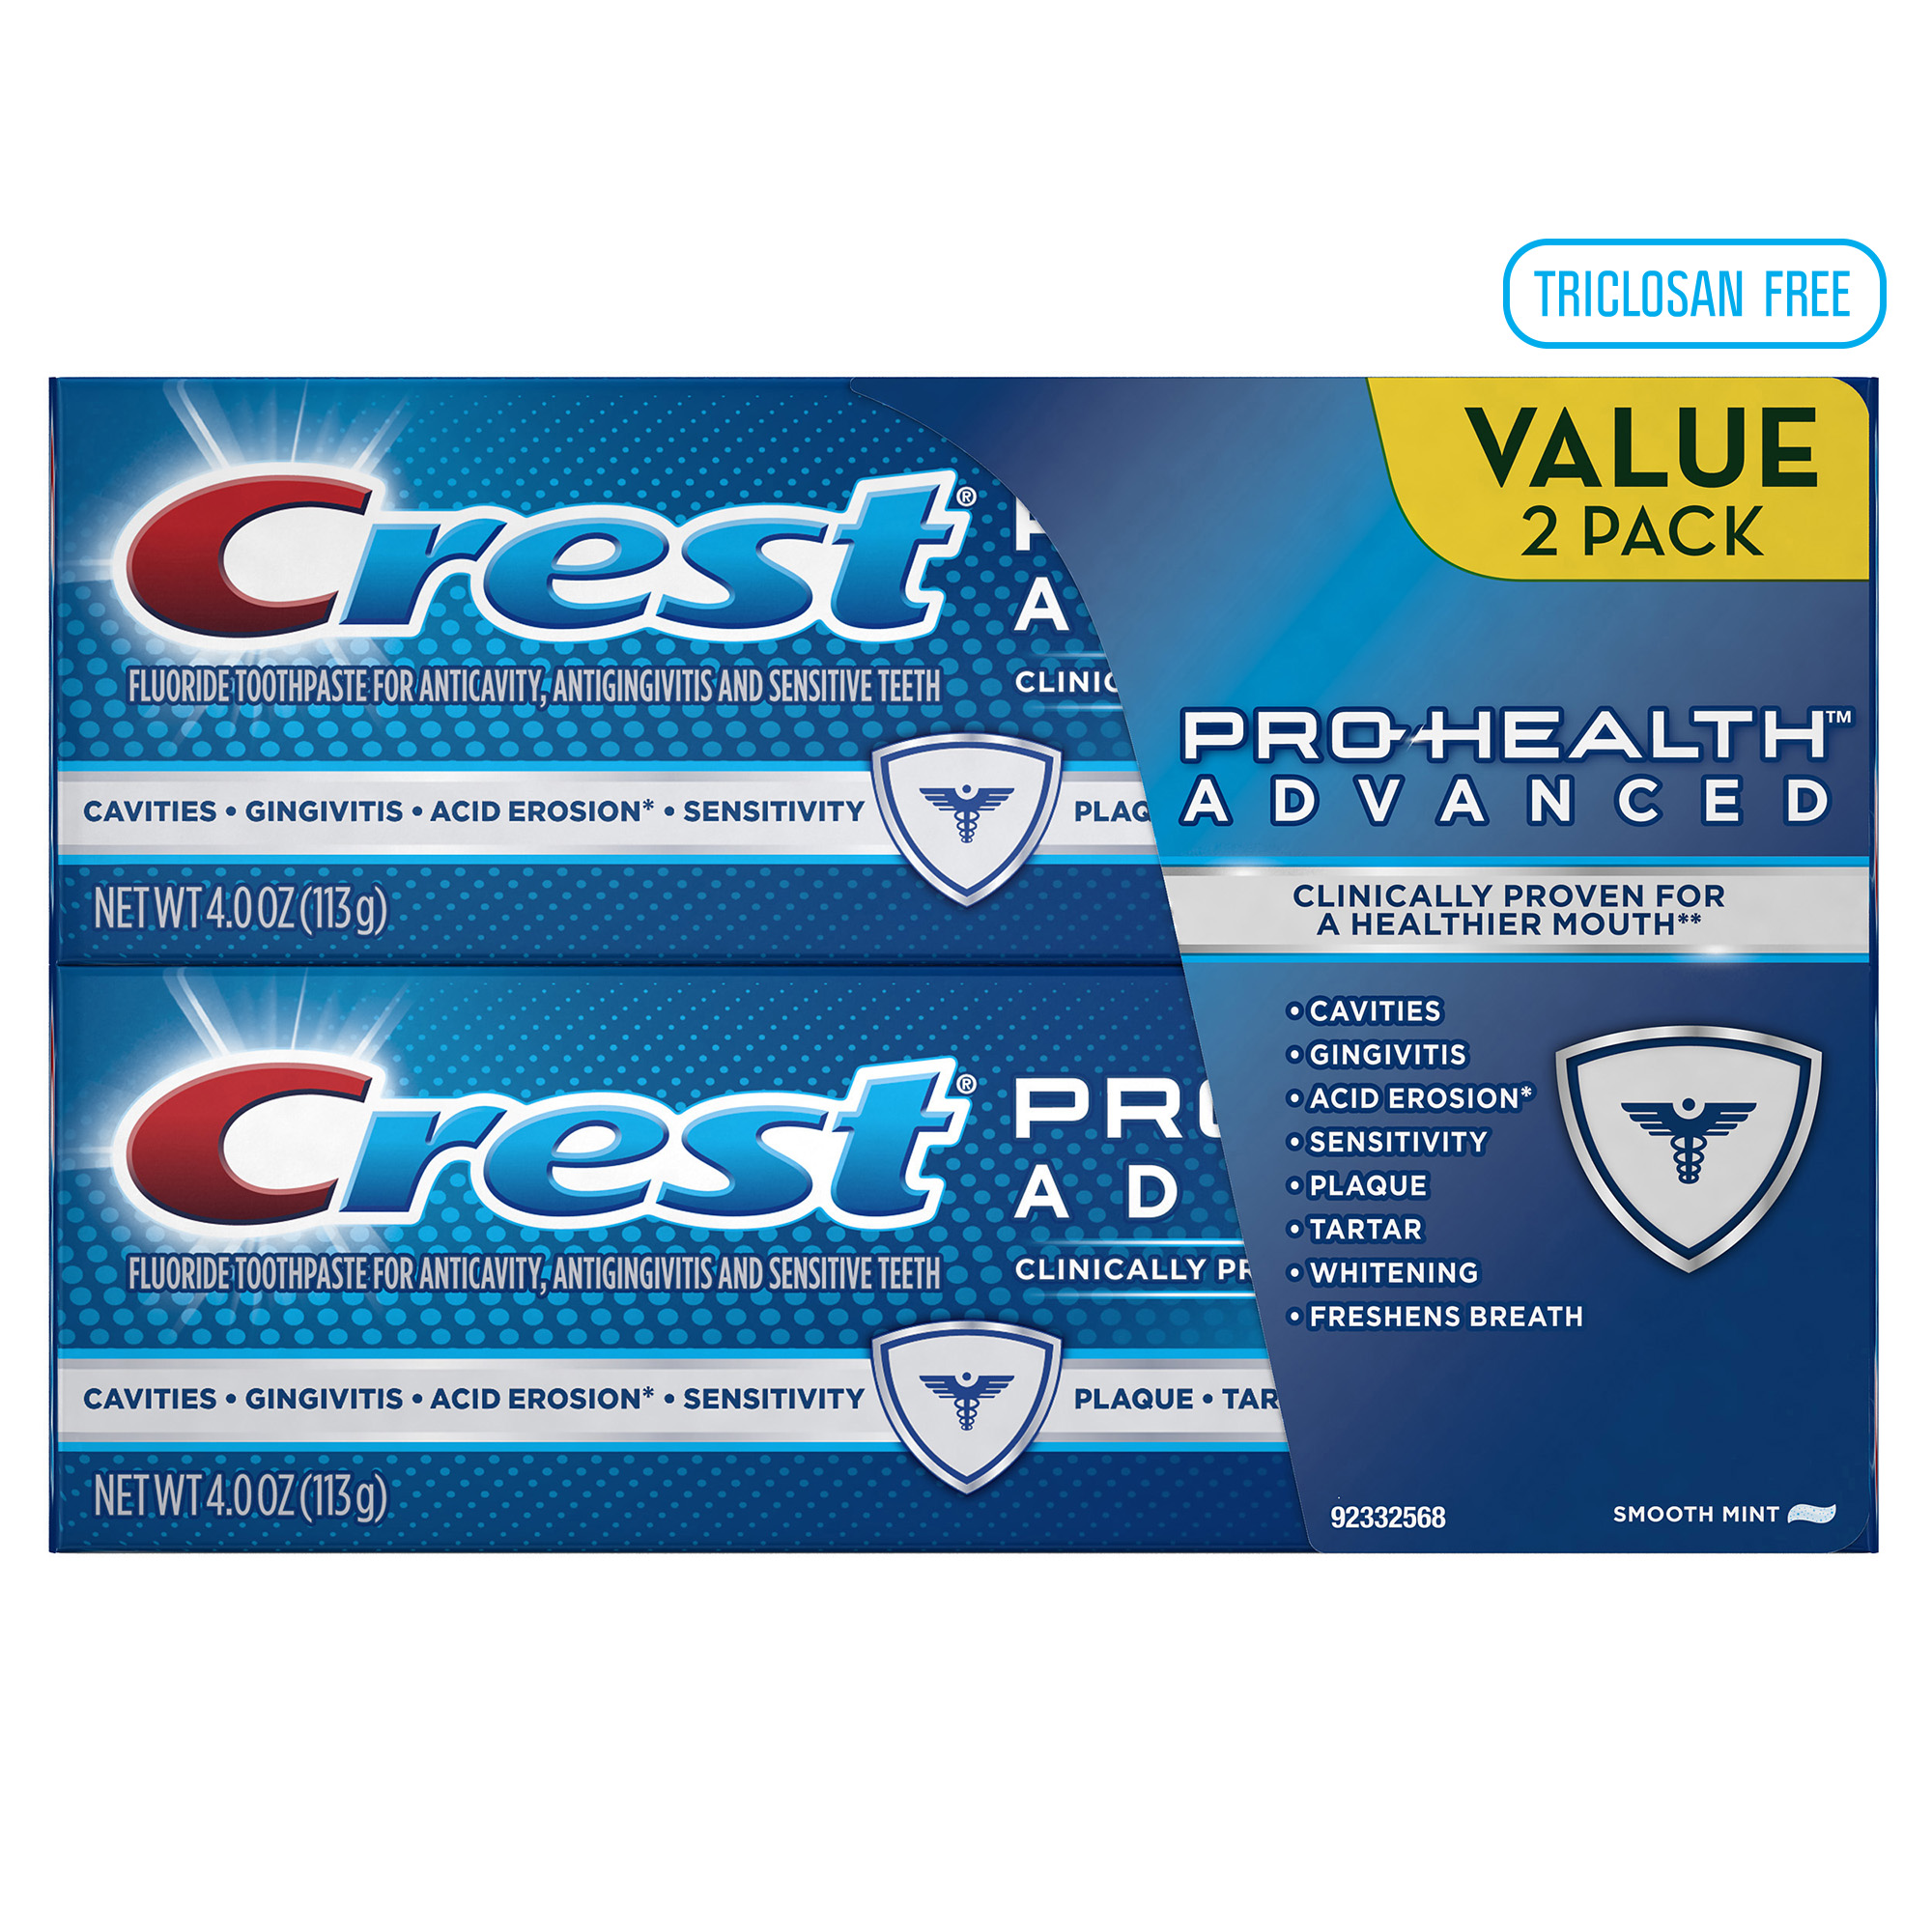 Crest Pro-Health Advanced Soothing Smooth Mint Toothpaste 8.0 oz. 2 Count - image 8 of 9